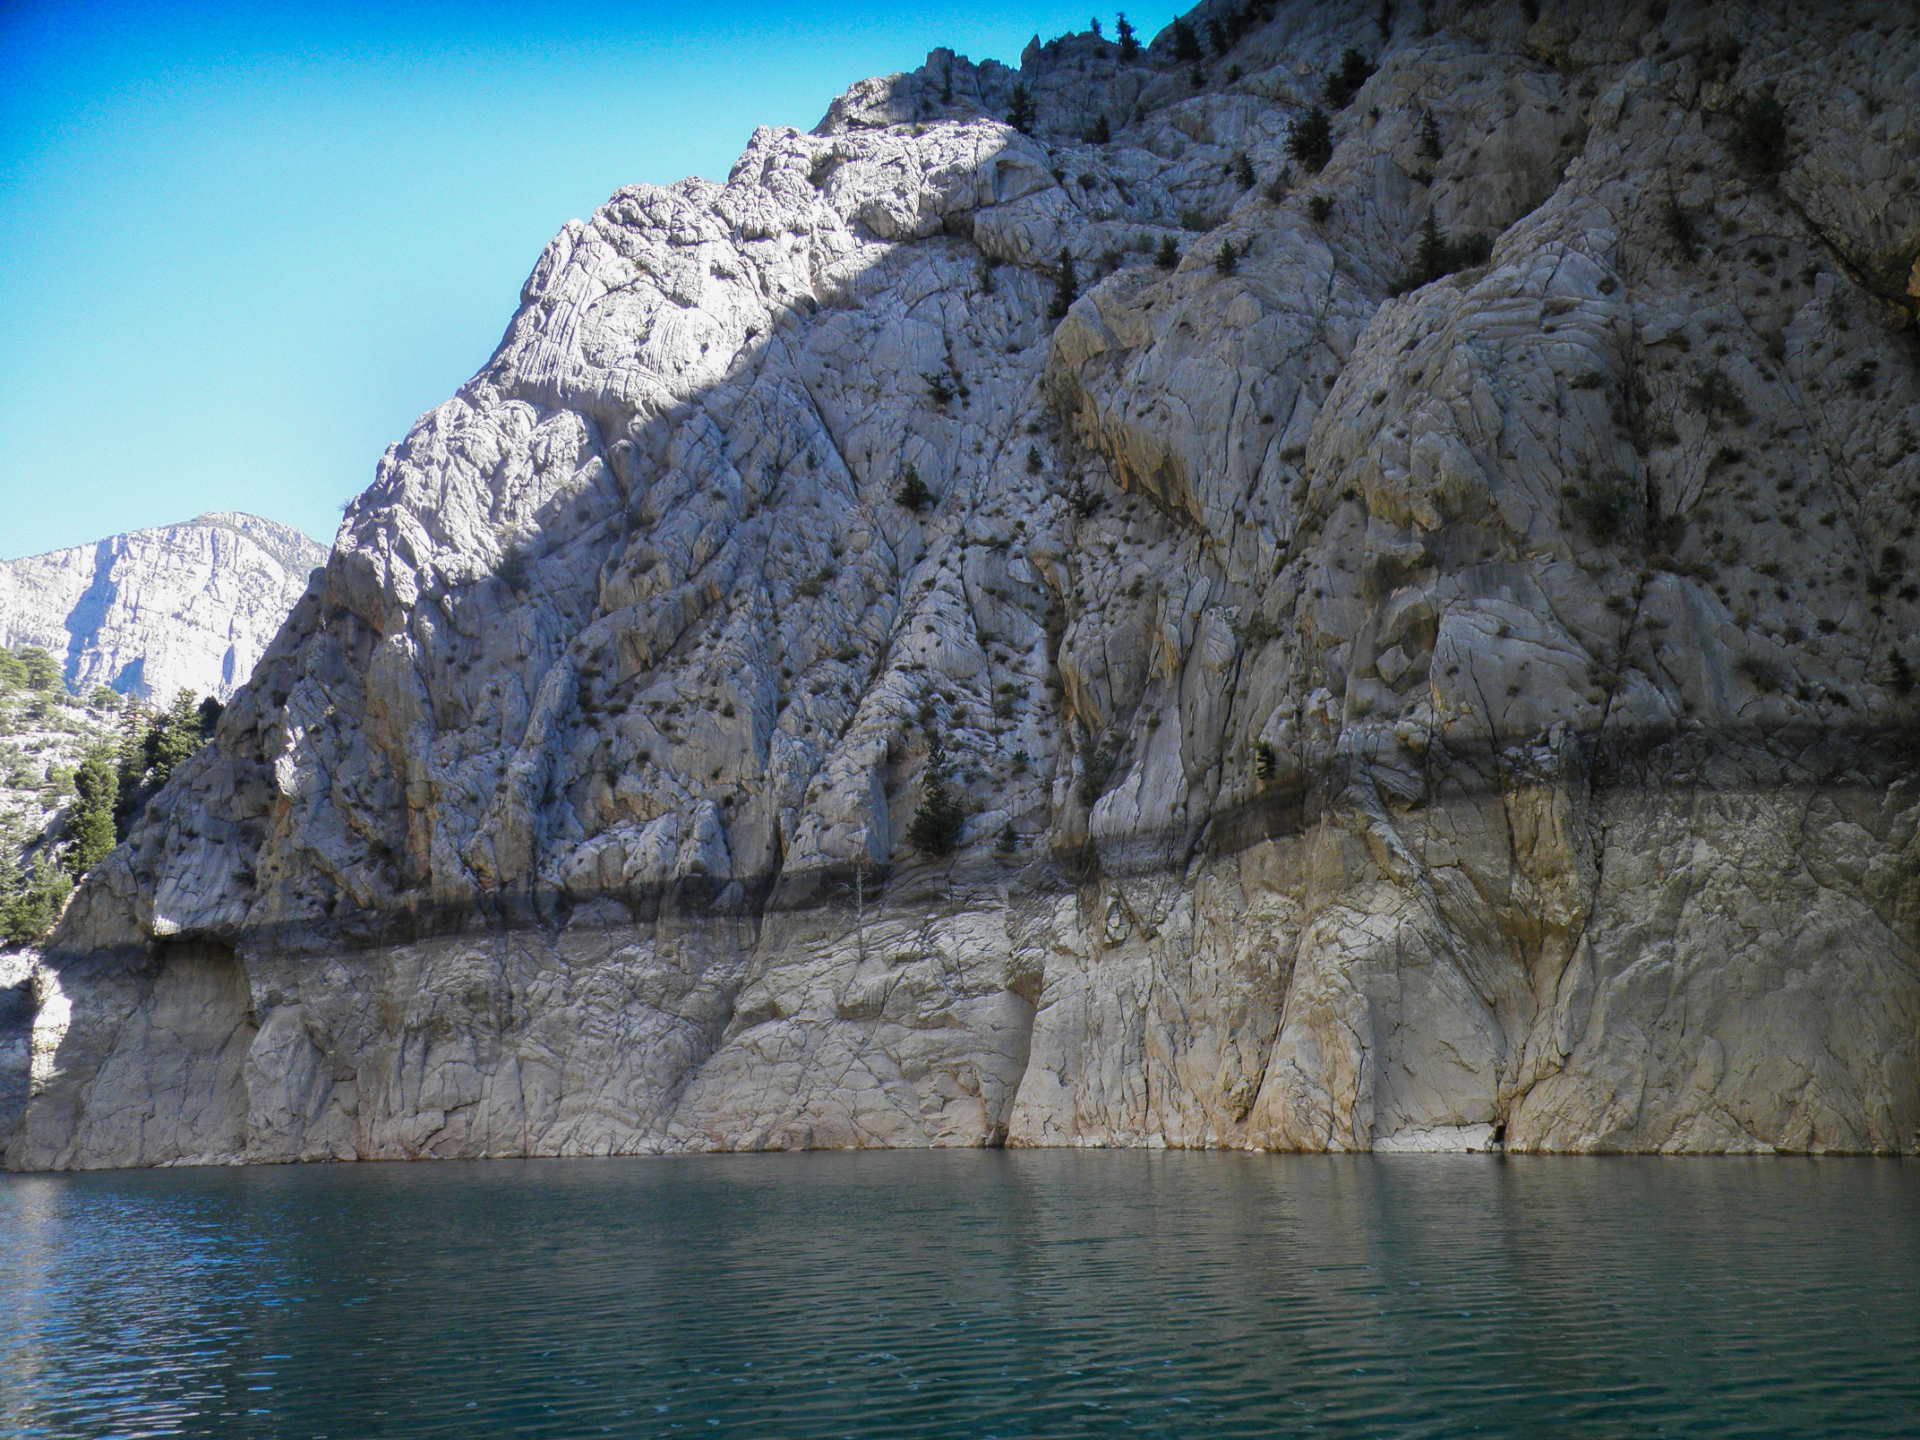 The previous water levels are visible on the rock